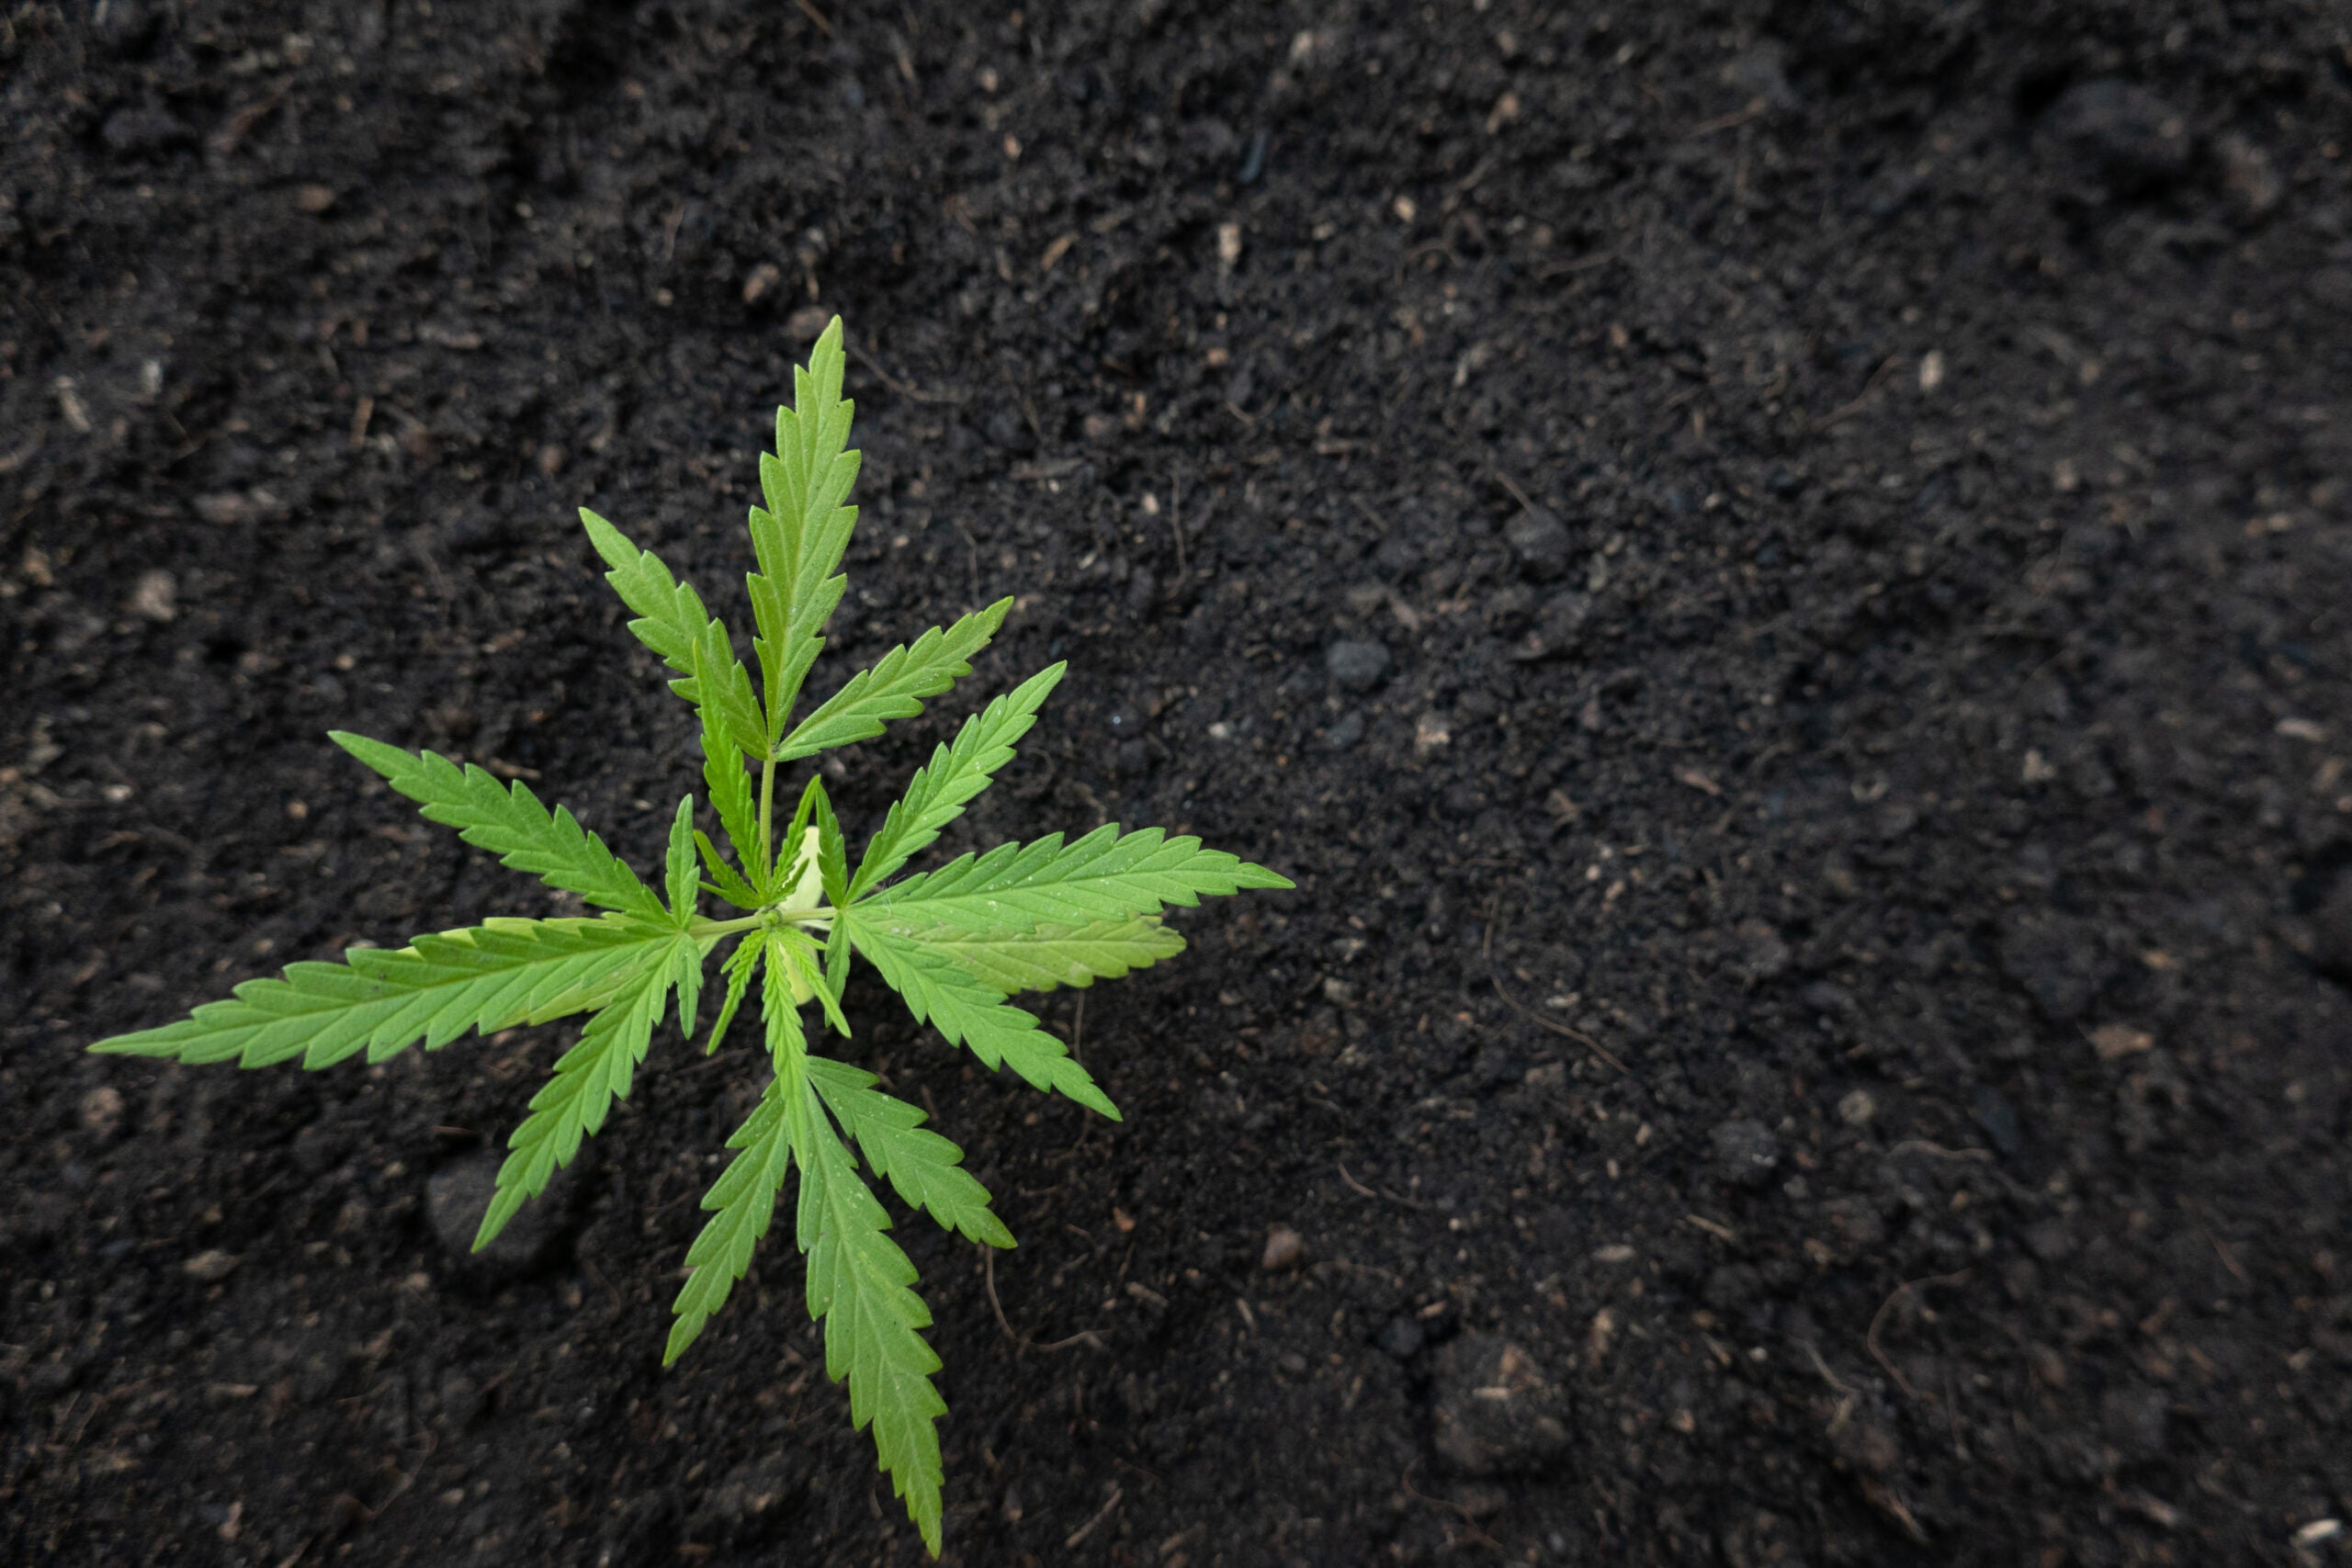 UK Cannabis Firm Announces World's First Carbon-Negative Cultivation Facility